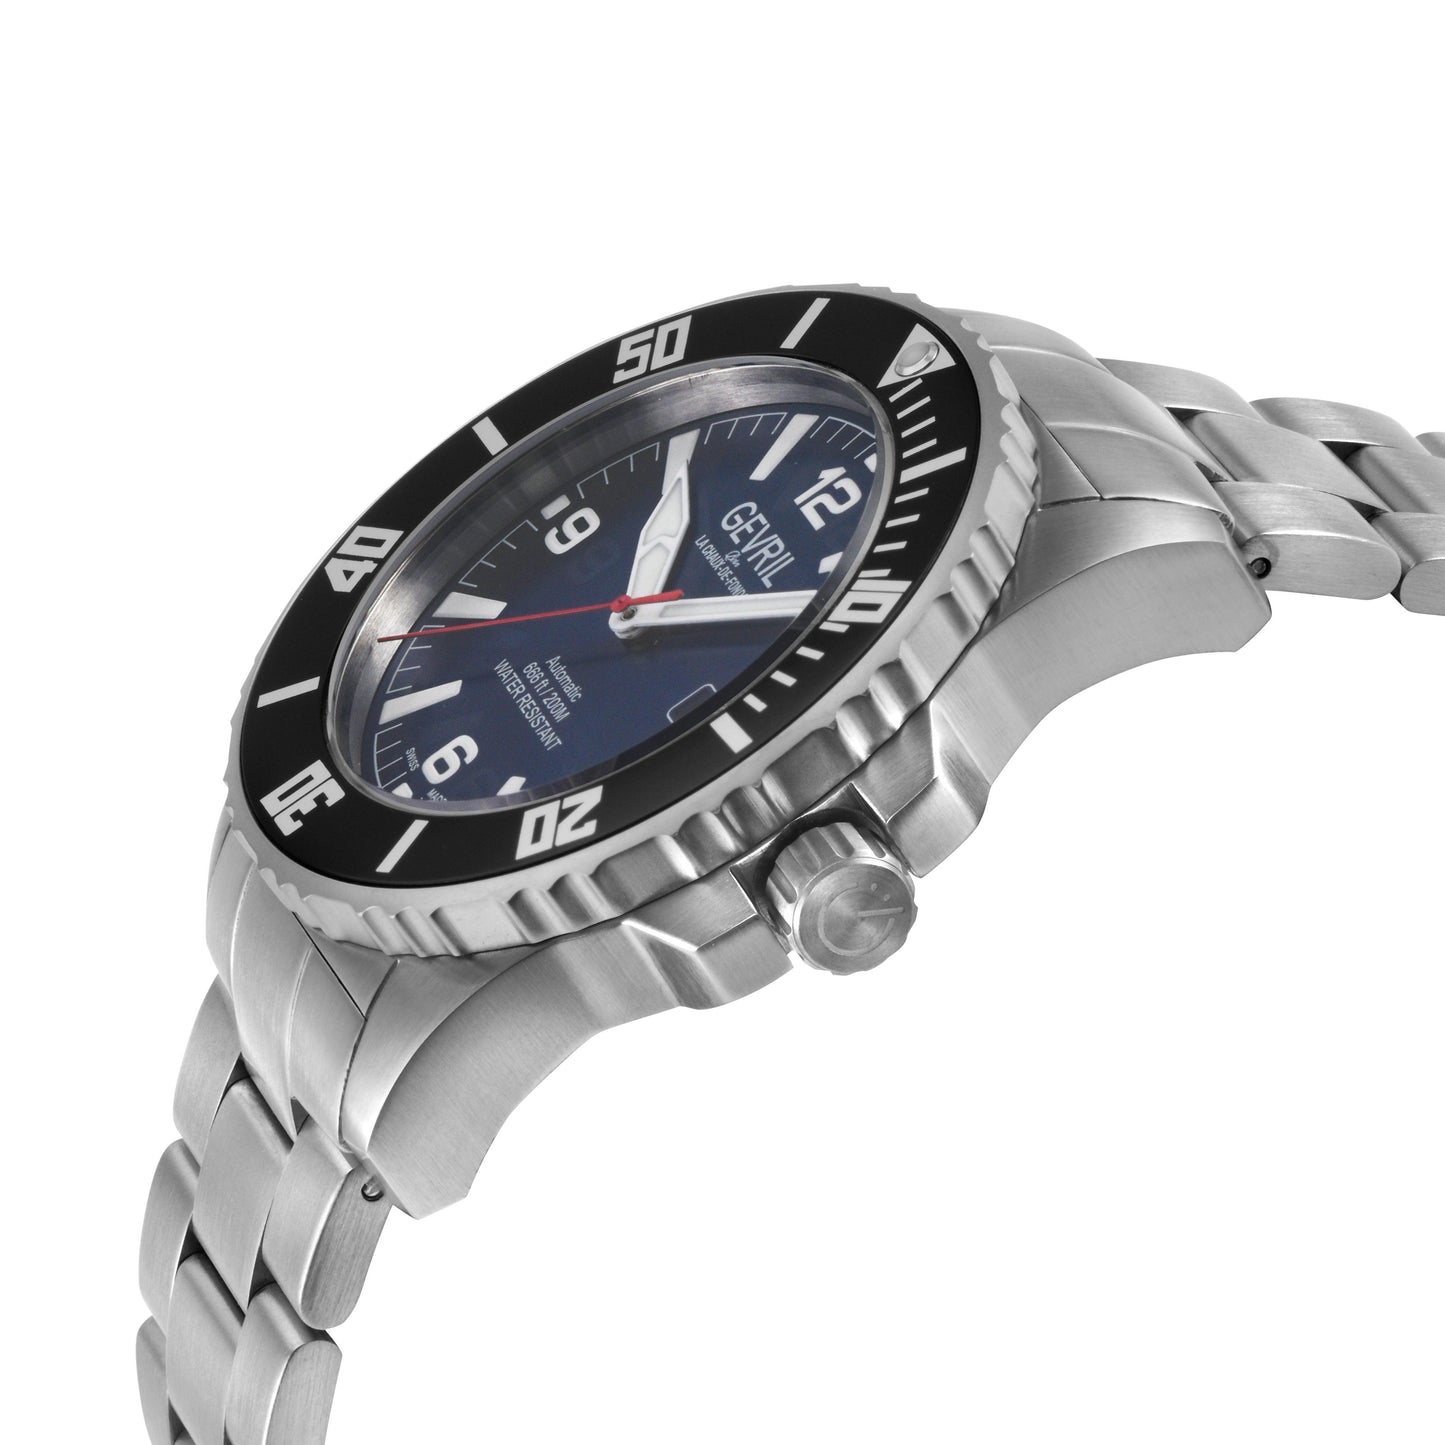 Gevril-Luxury-Swiss-Watches-Gevril Canal Street Bold Automatic Diver-46601B